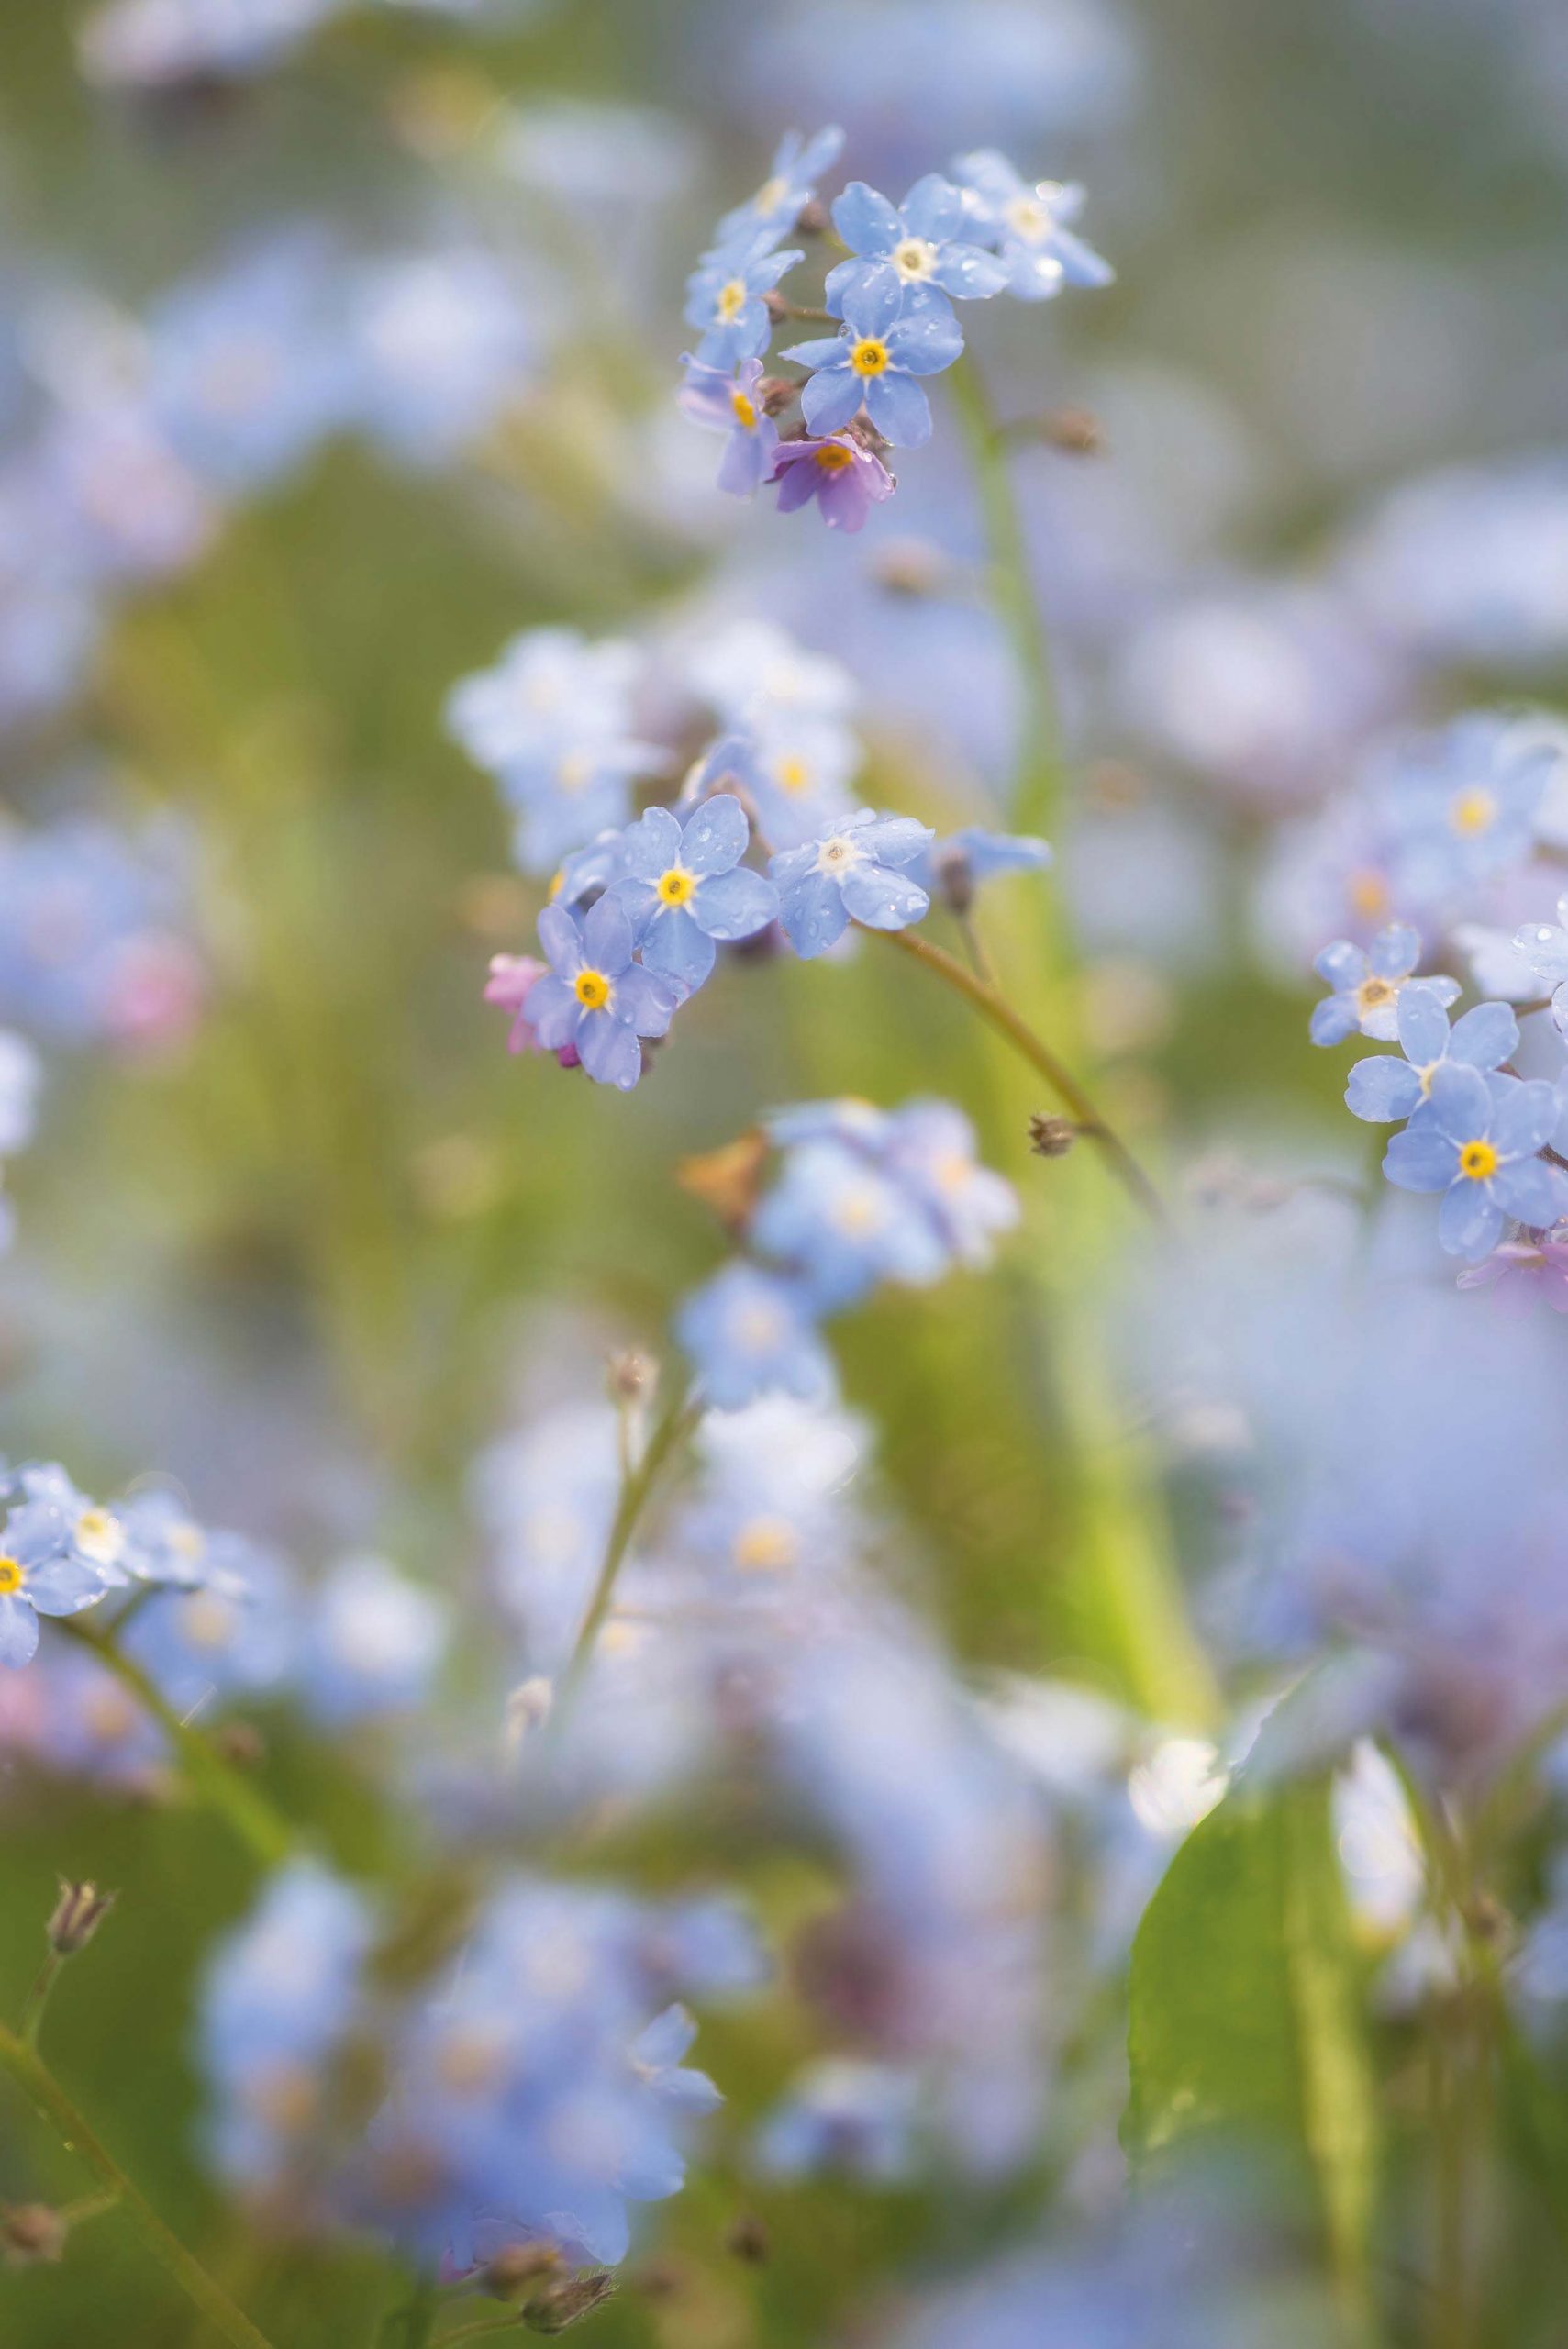 When To Plant Forget-Me-Nots - Tips On Planting Forget-Me-Nots From Seeds